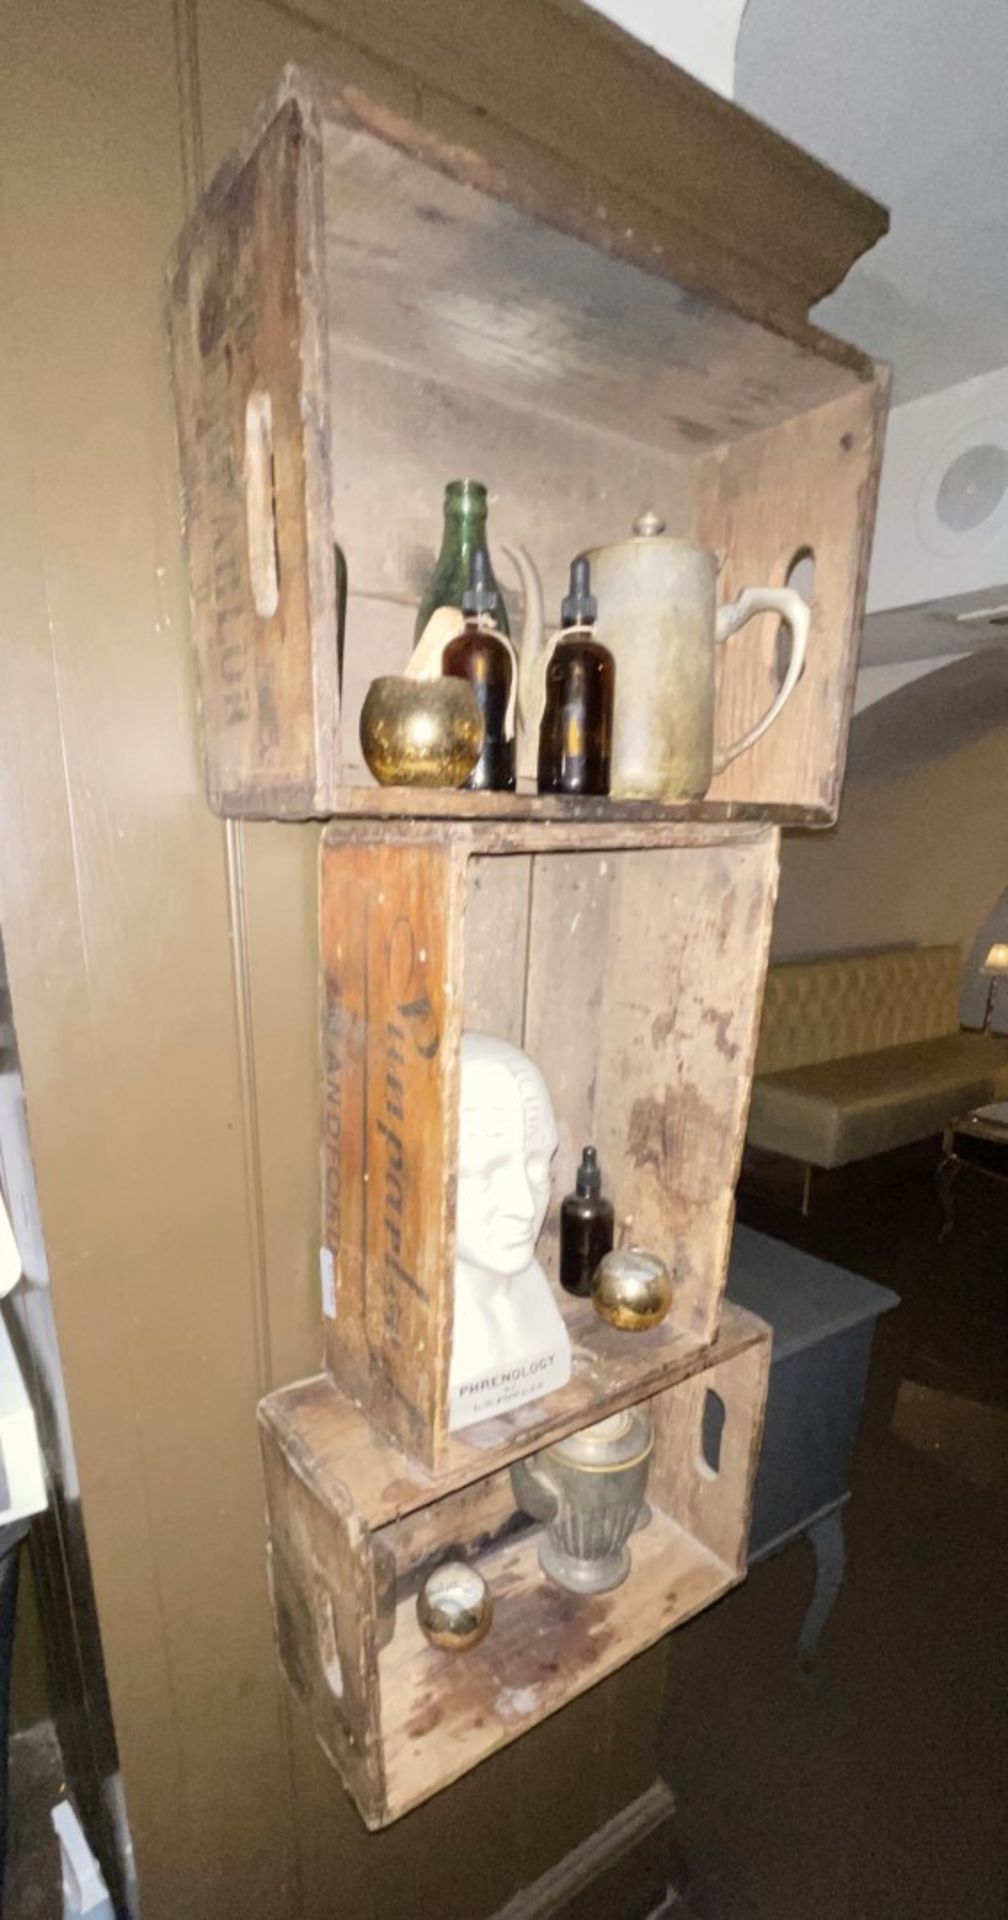 3 x Ford Branded Wall Mounted Soap Boxes and Vintage Contents Within Including Phrenology Bust - Bild 2 aus 6